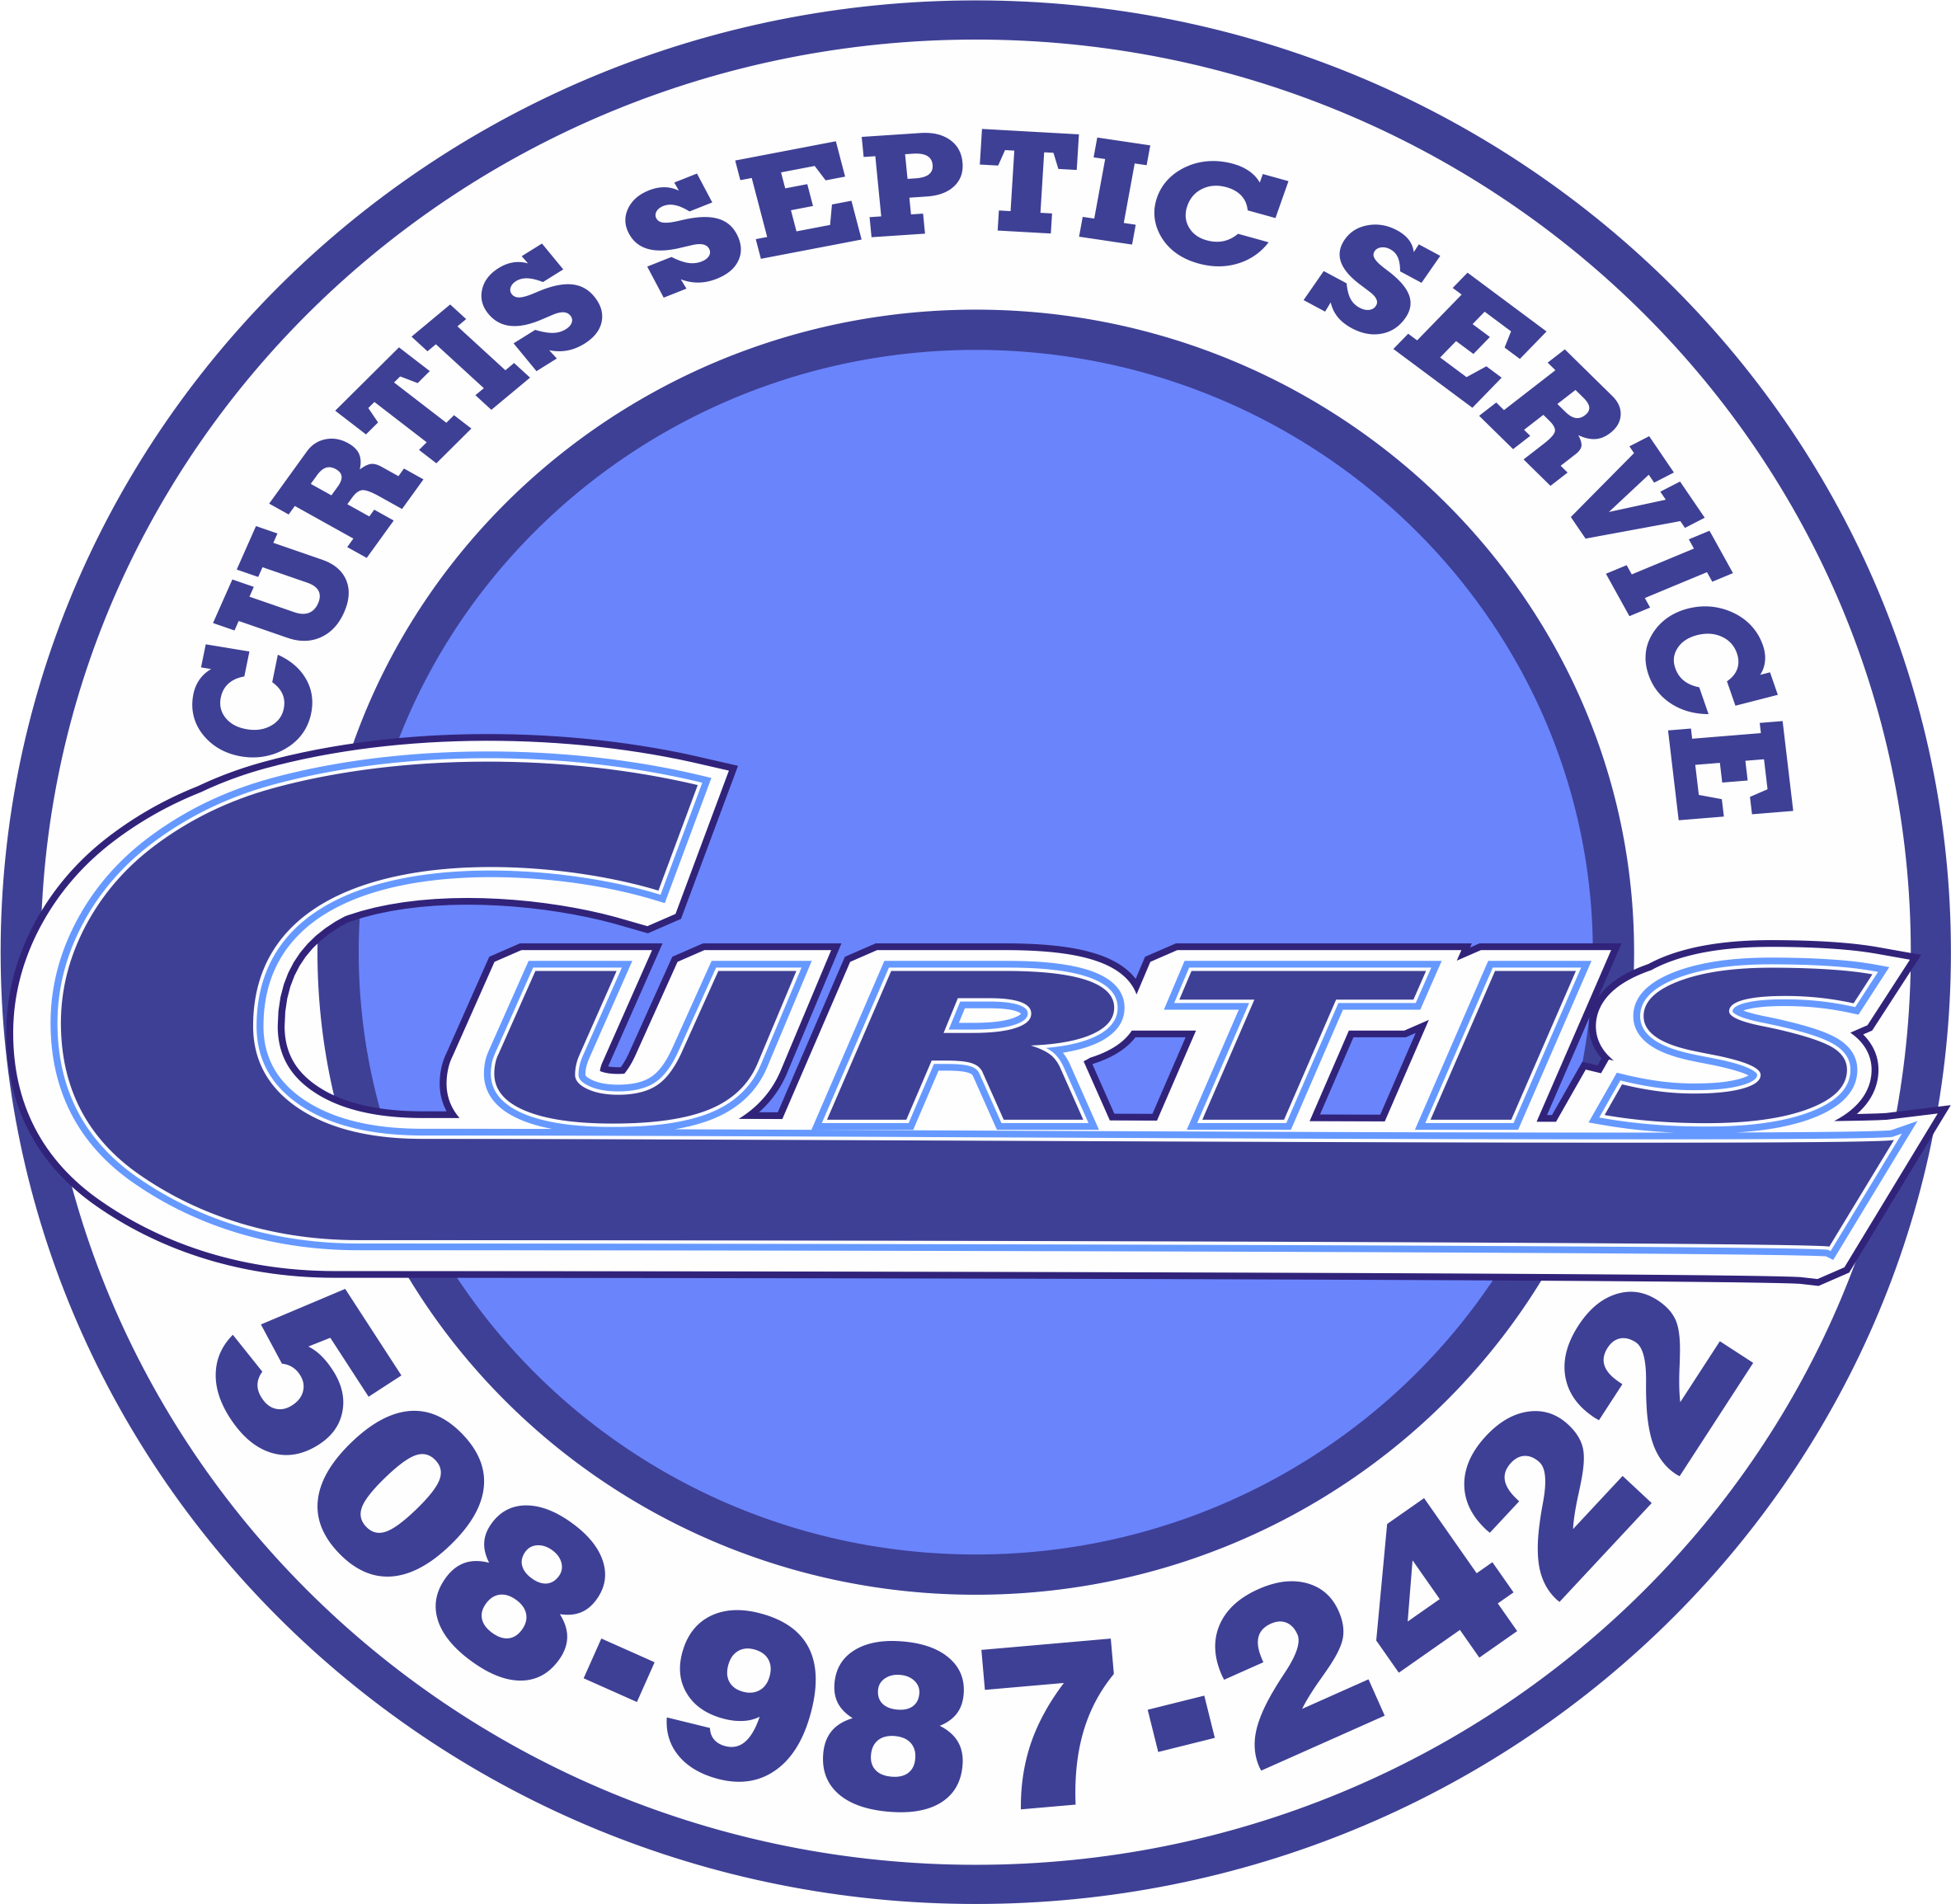 Cheapest septic pumping in Massachusetts